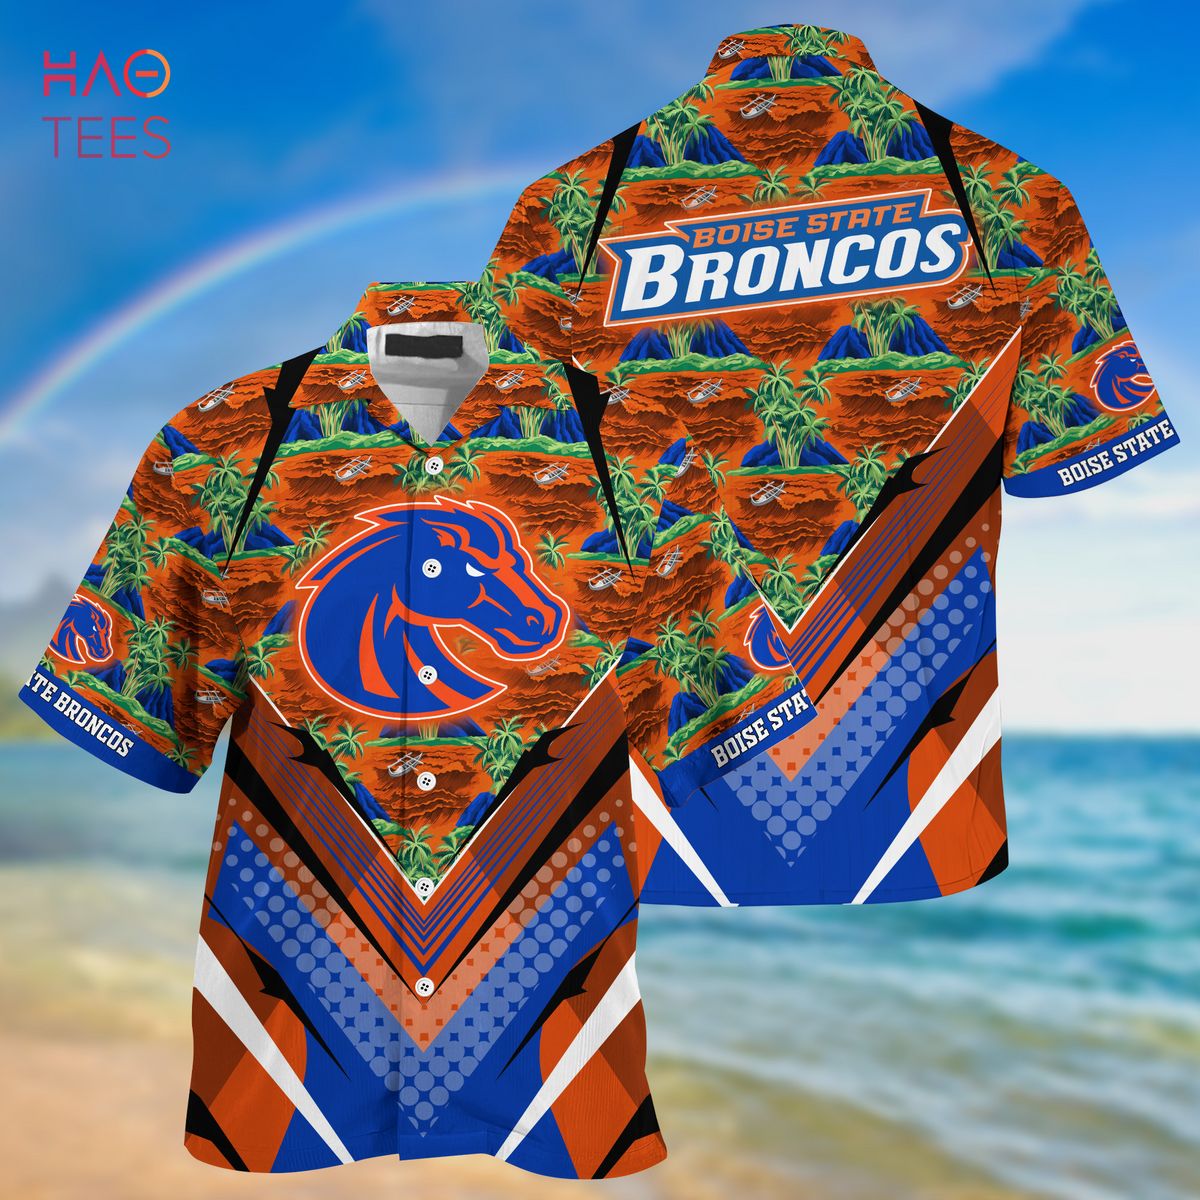 [TRENDING] Boise State Broncos Summer Hawaiian Shirt And Shorts, For Sports Fans This Season